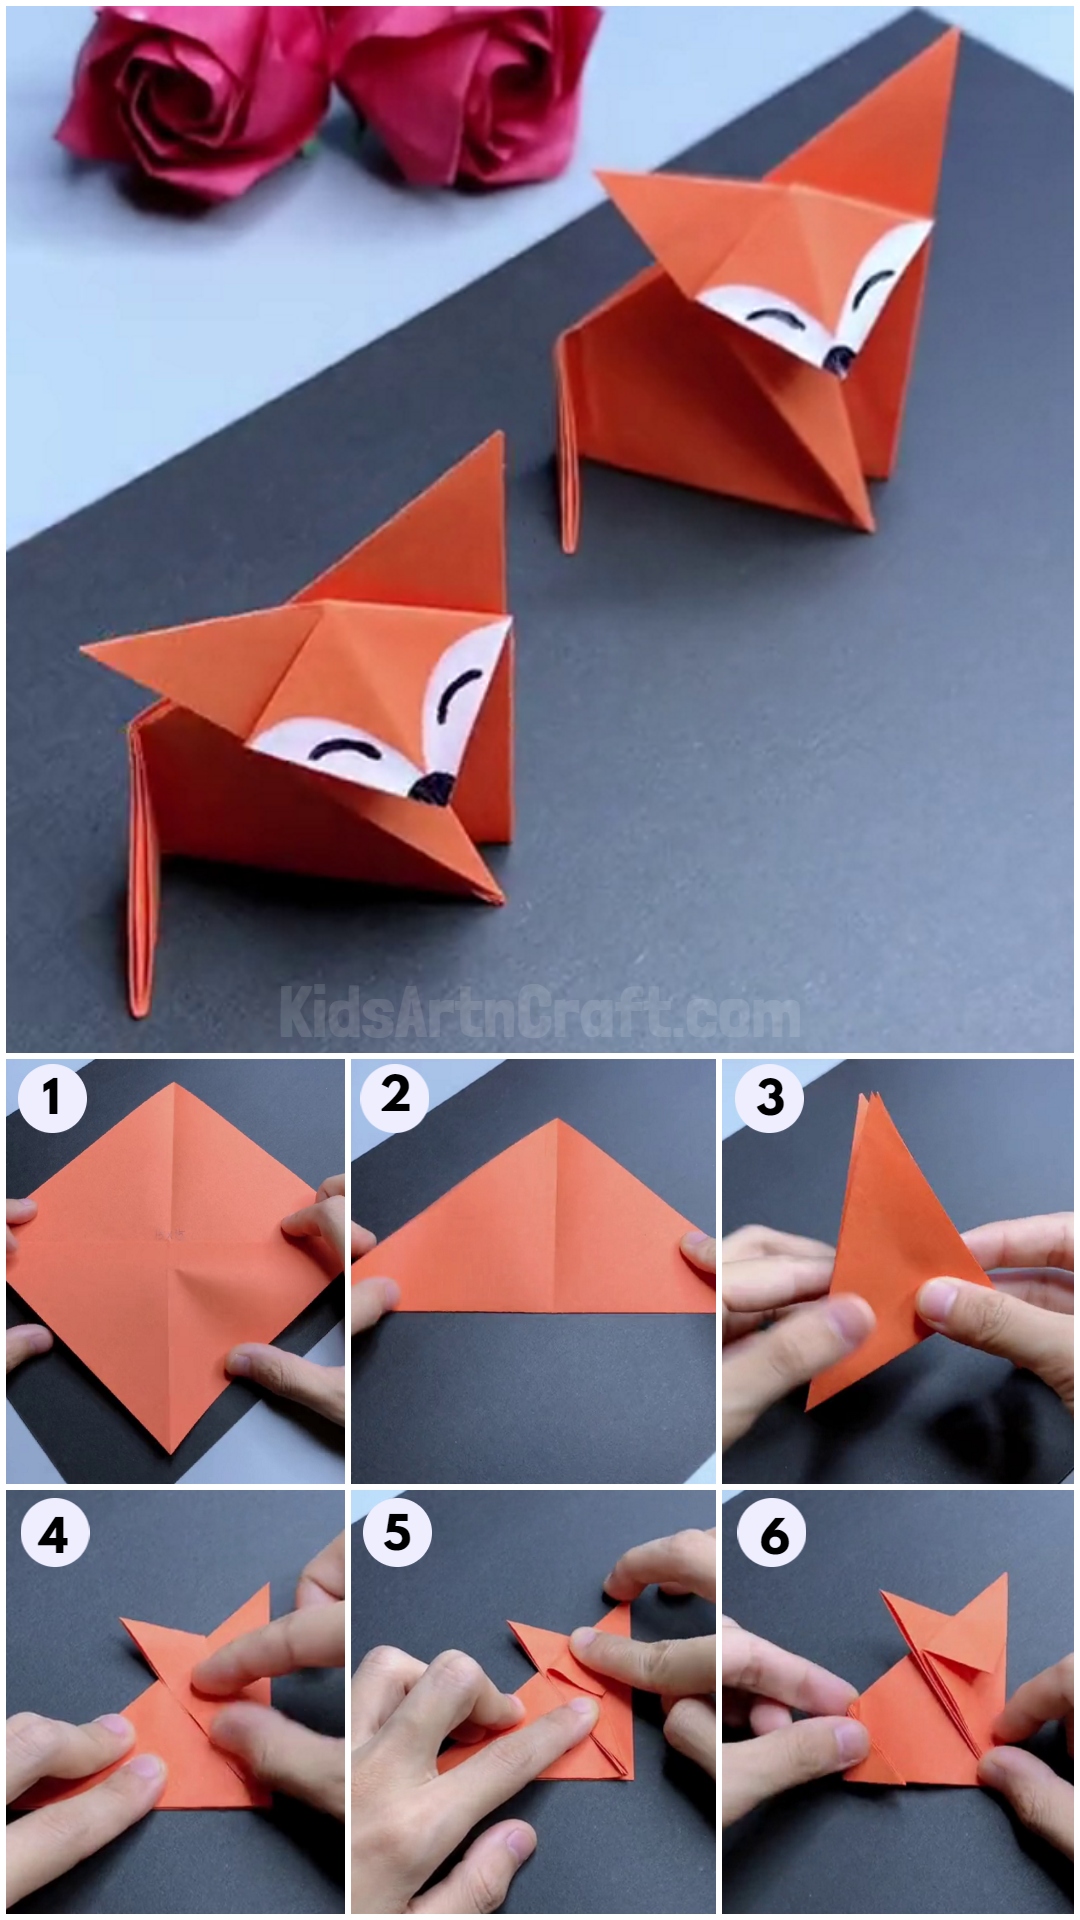  How to Make an Origami Papercraft Fox for kids